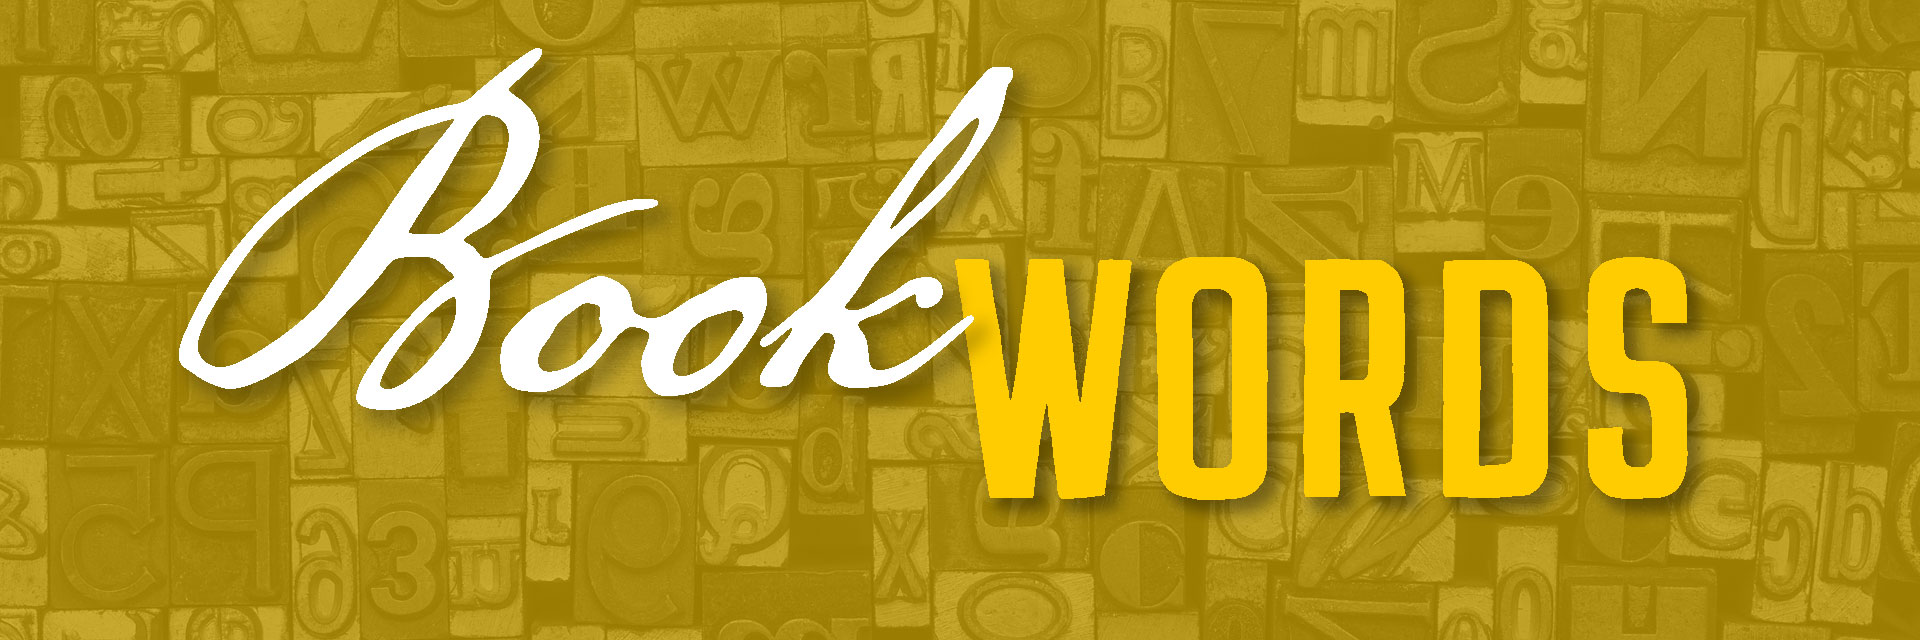 "Book Words" title over movable type background